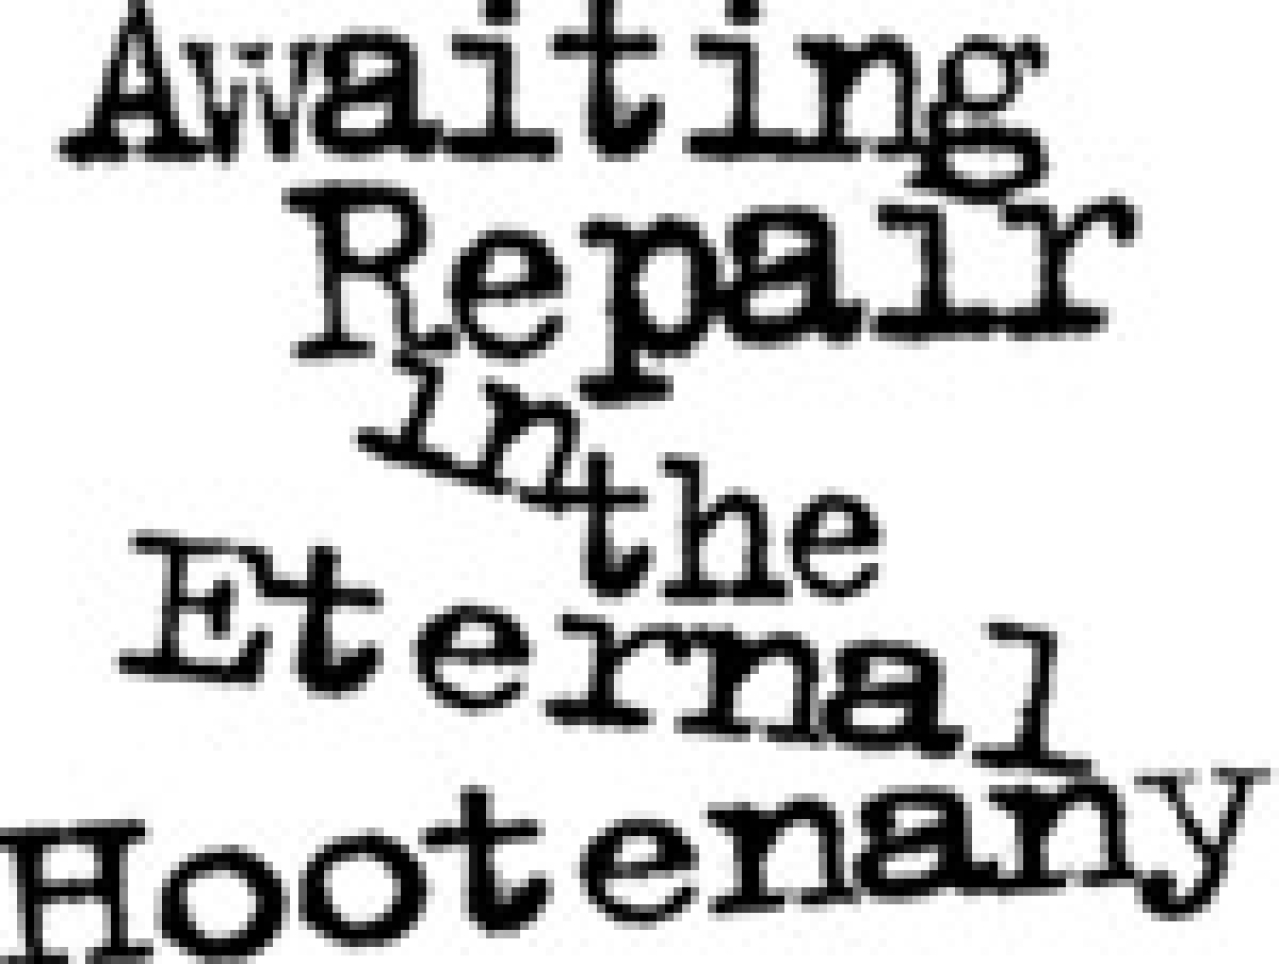 awaiting repair in the eternal hootenanny logo Broadway shows and tickets